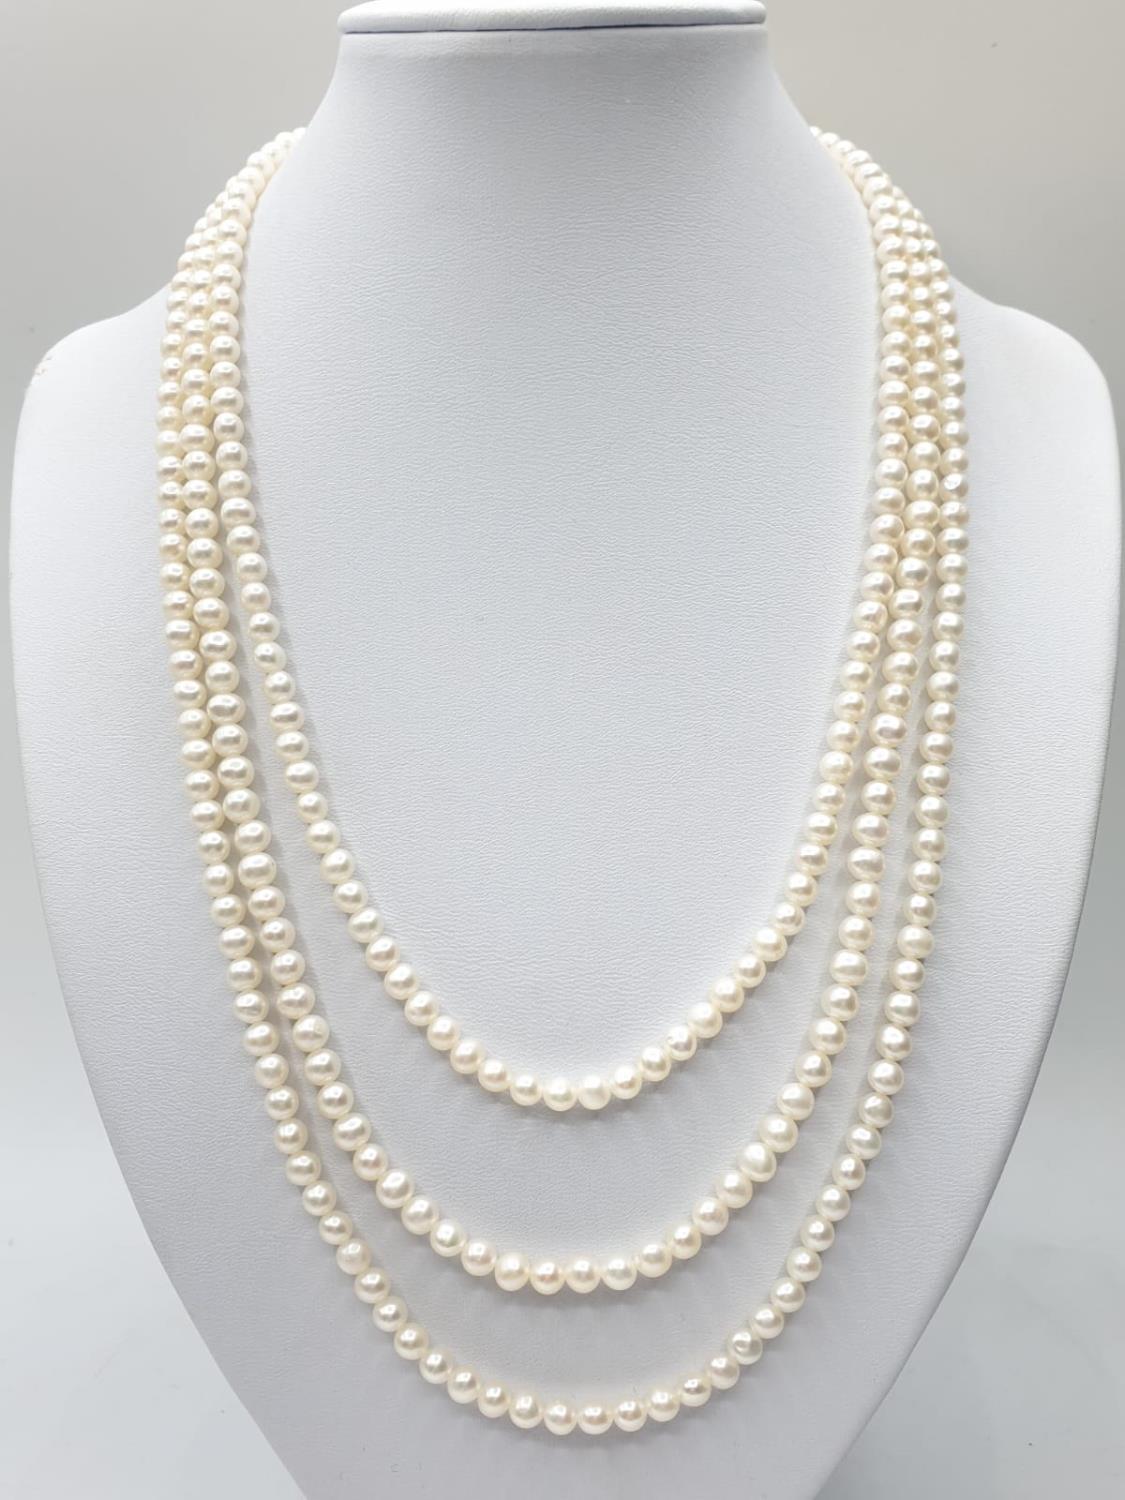 3 rows of Cultured pearl necklace set in 9ct gold clasp , weight 49g and 46cm long approx - Image 5 of 6